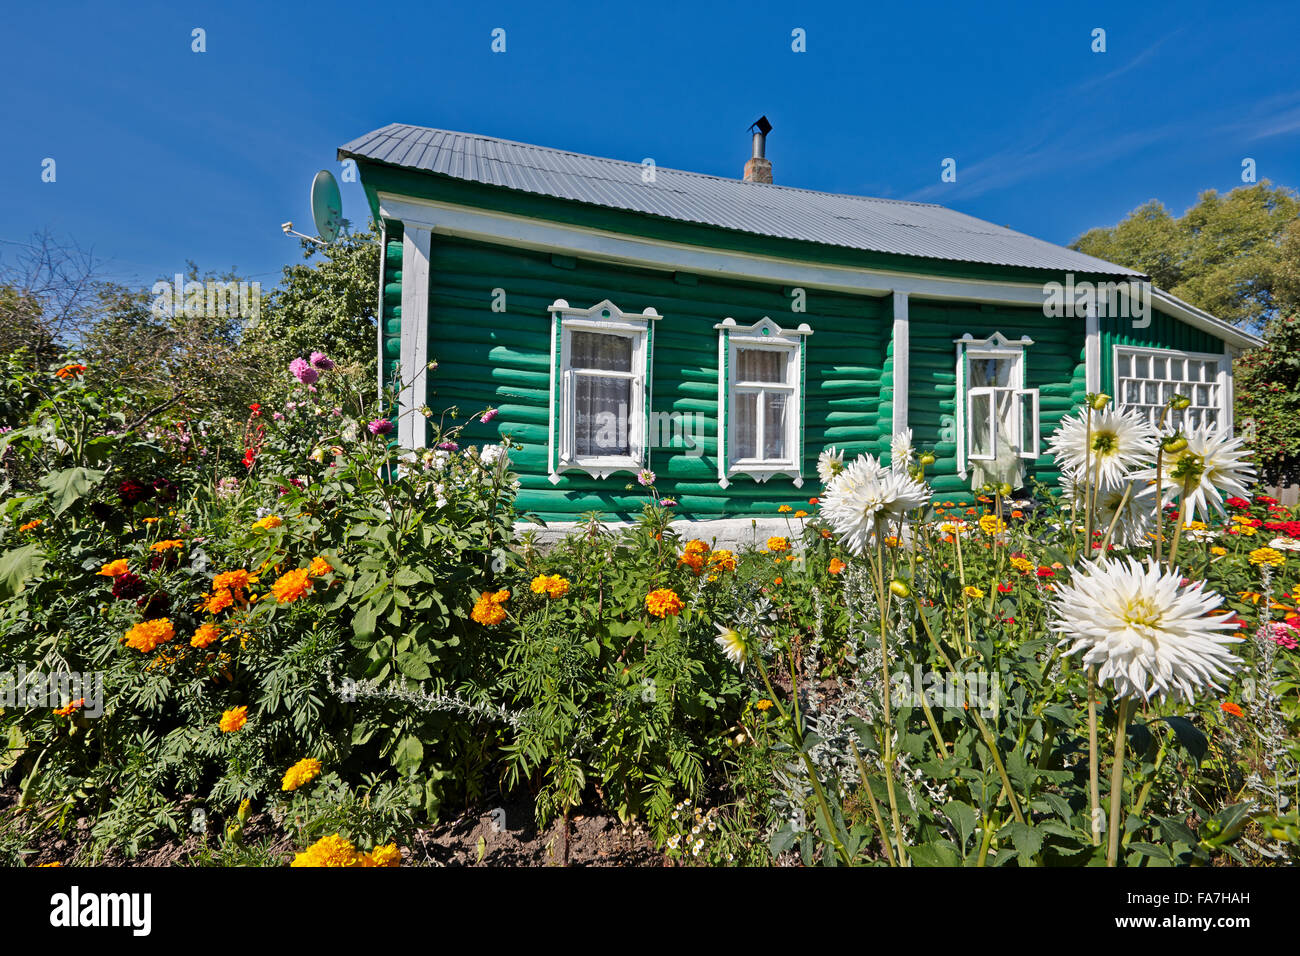 Green log country house with allotment garden. Kaluga region, Central Russia. Stock Photo